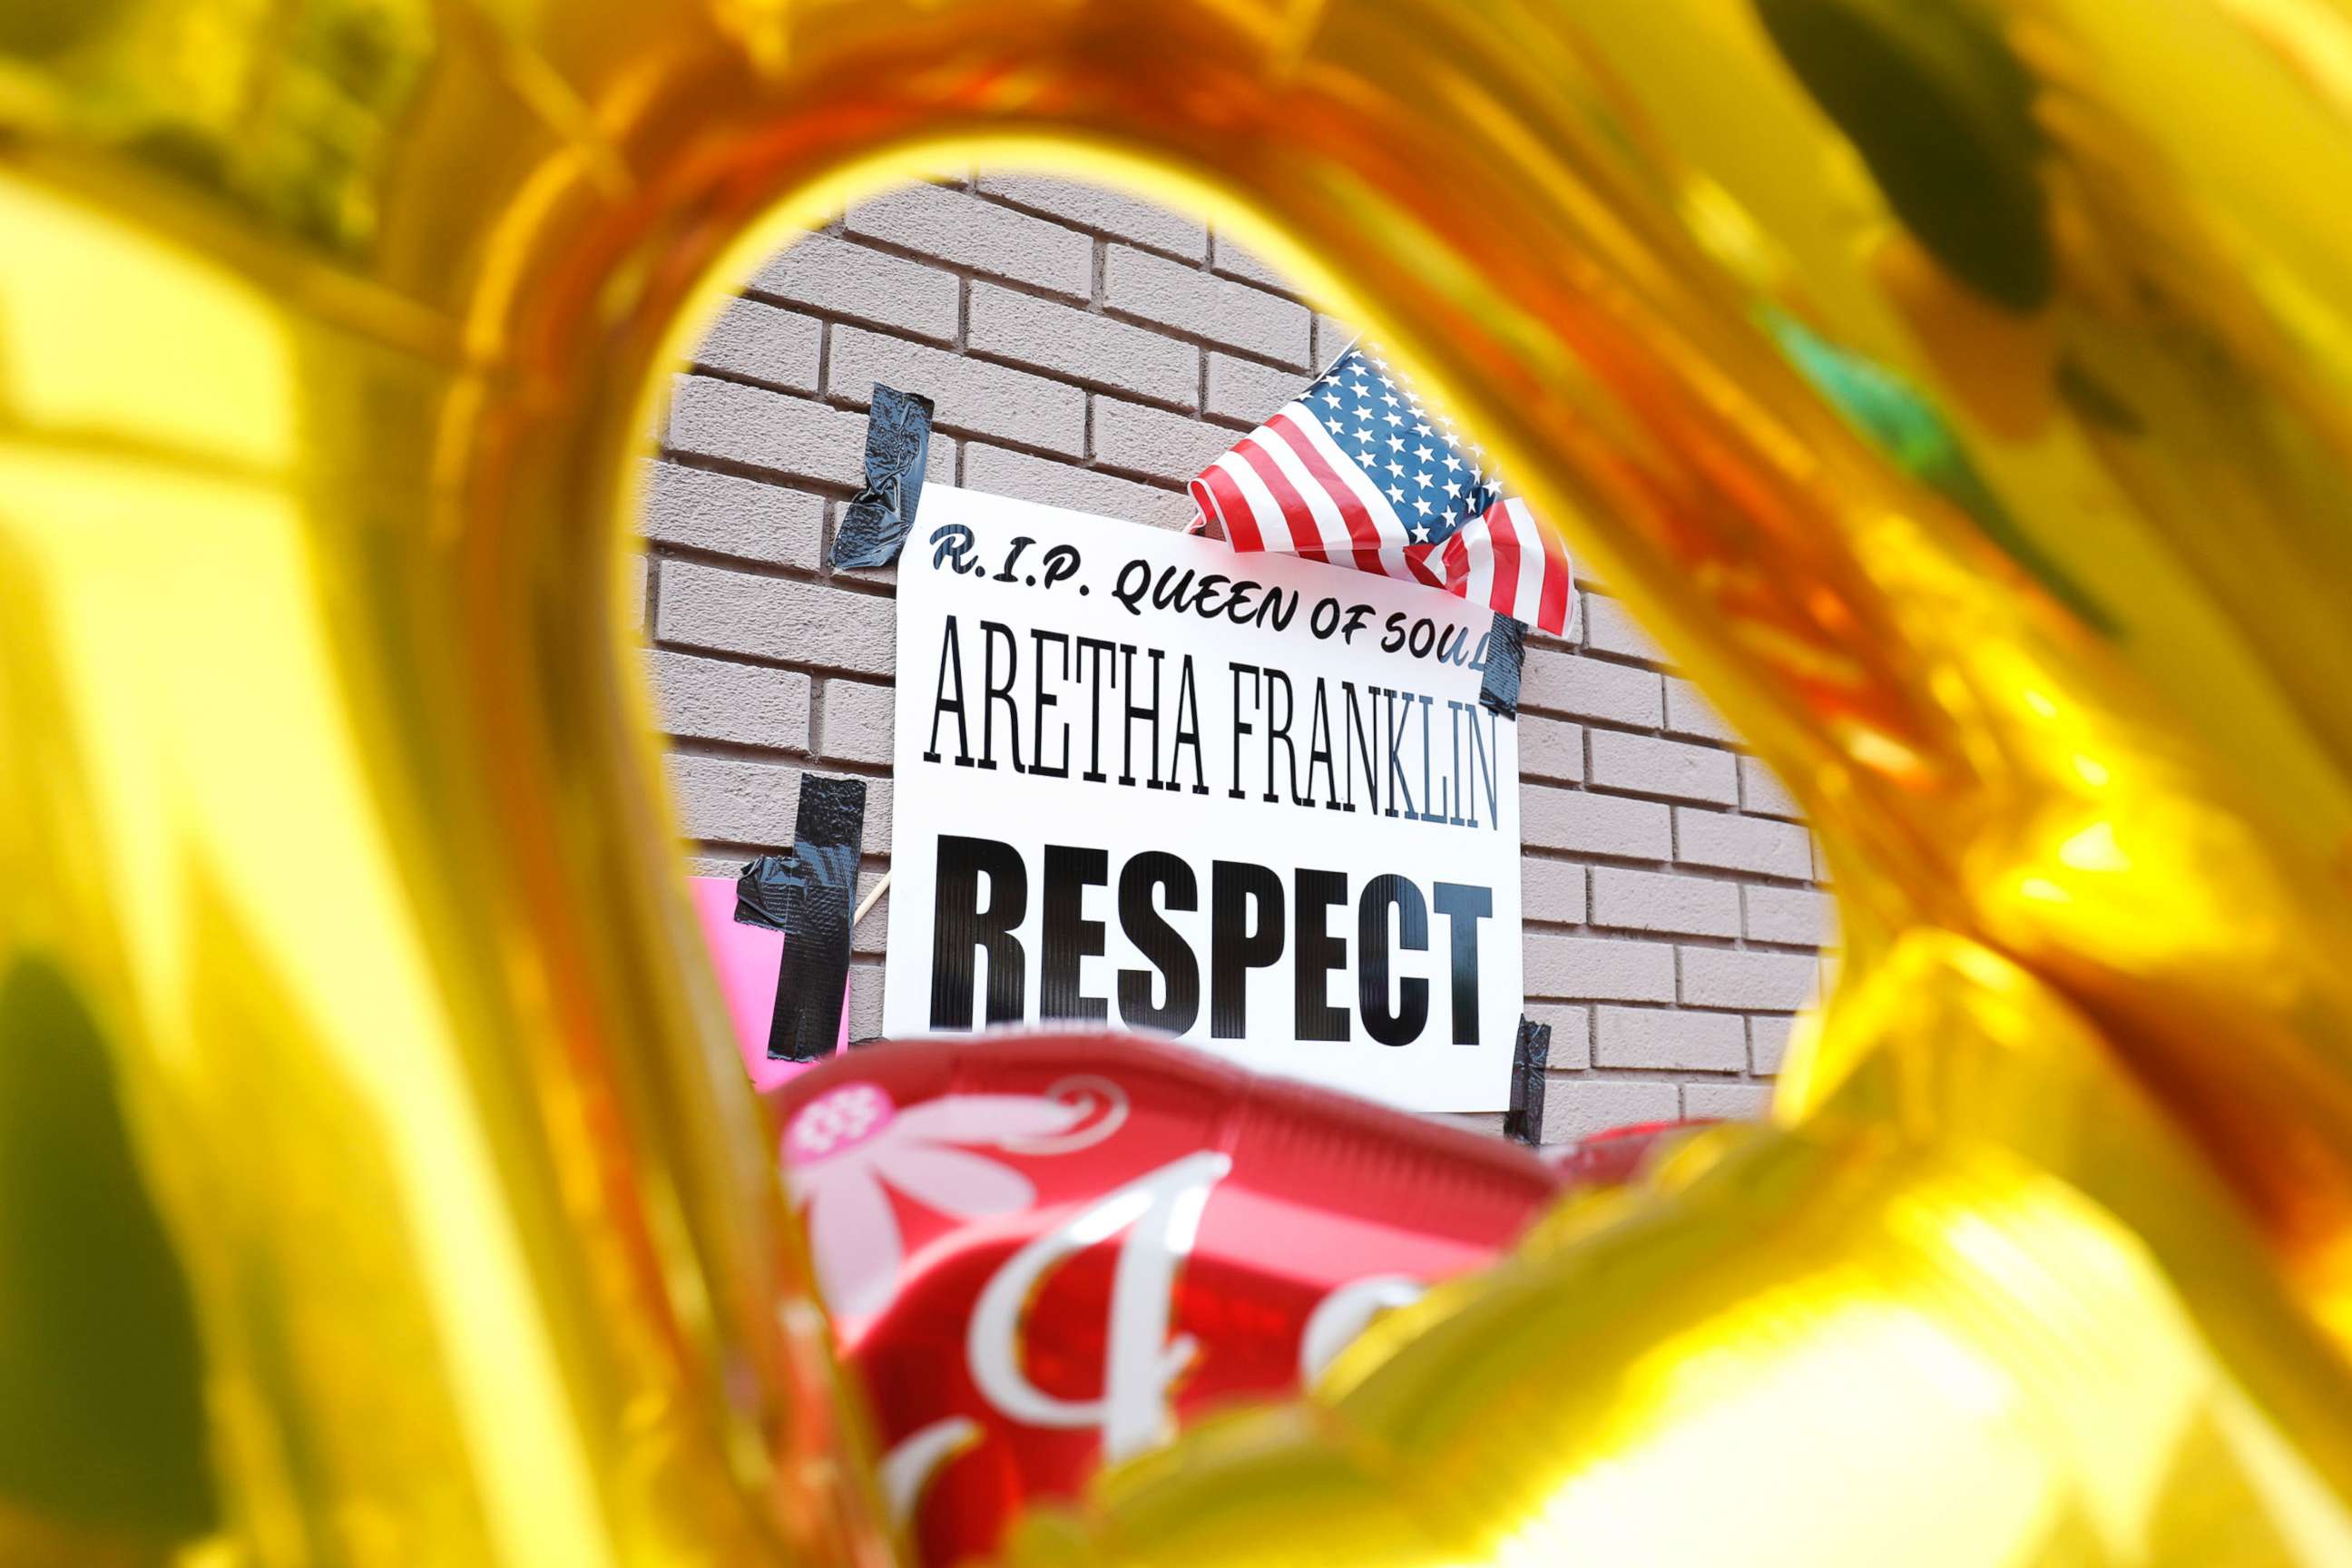 PHOTO: An impromptu memorial for singer Aretha Franklin is shown outside New Bethel Baptist Church, the church where Aretha Franklin's late father Rev. C.L. Franklin was a minister and where she began her singing career, August 19, 2018 in Detroit.